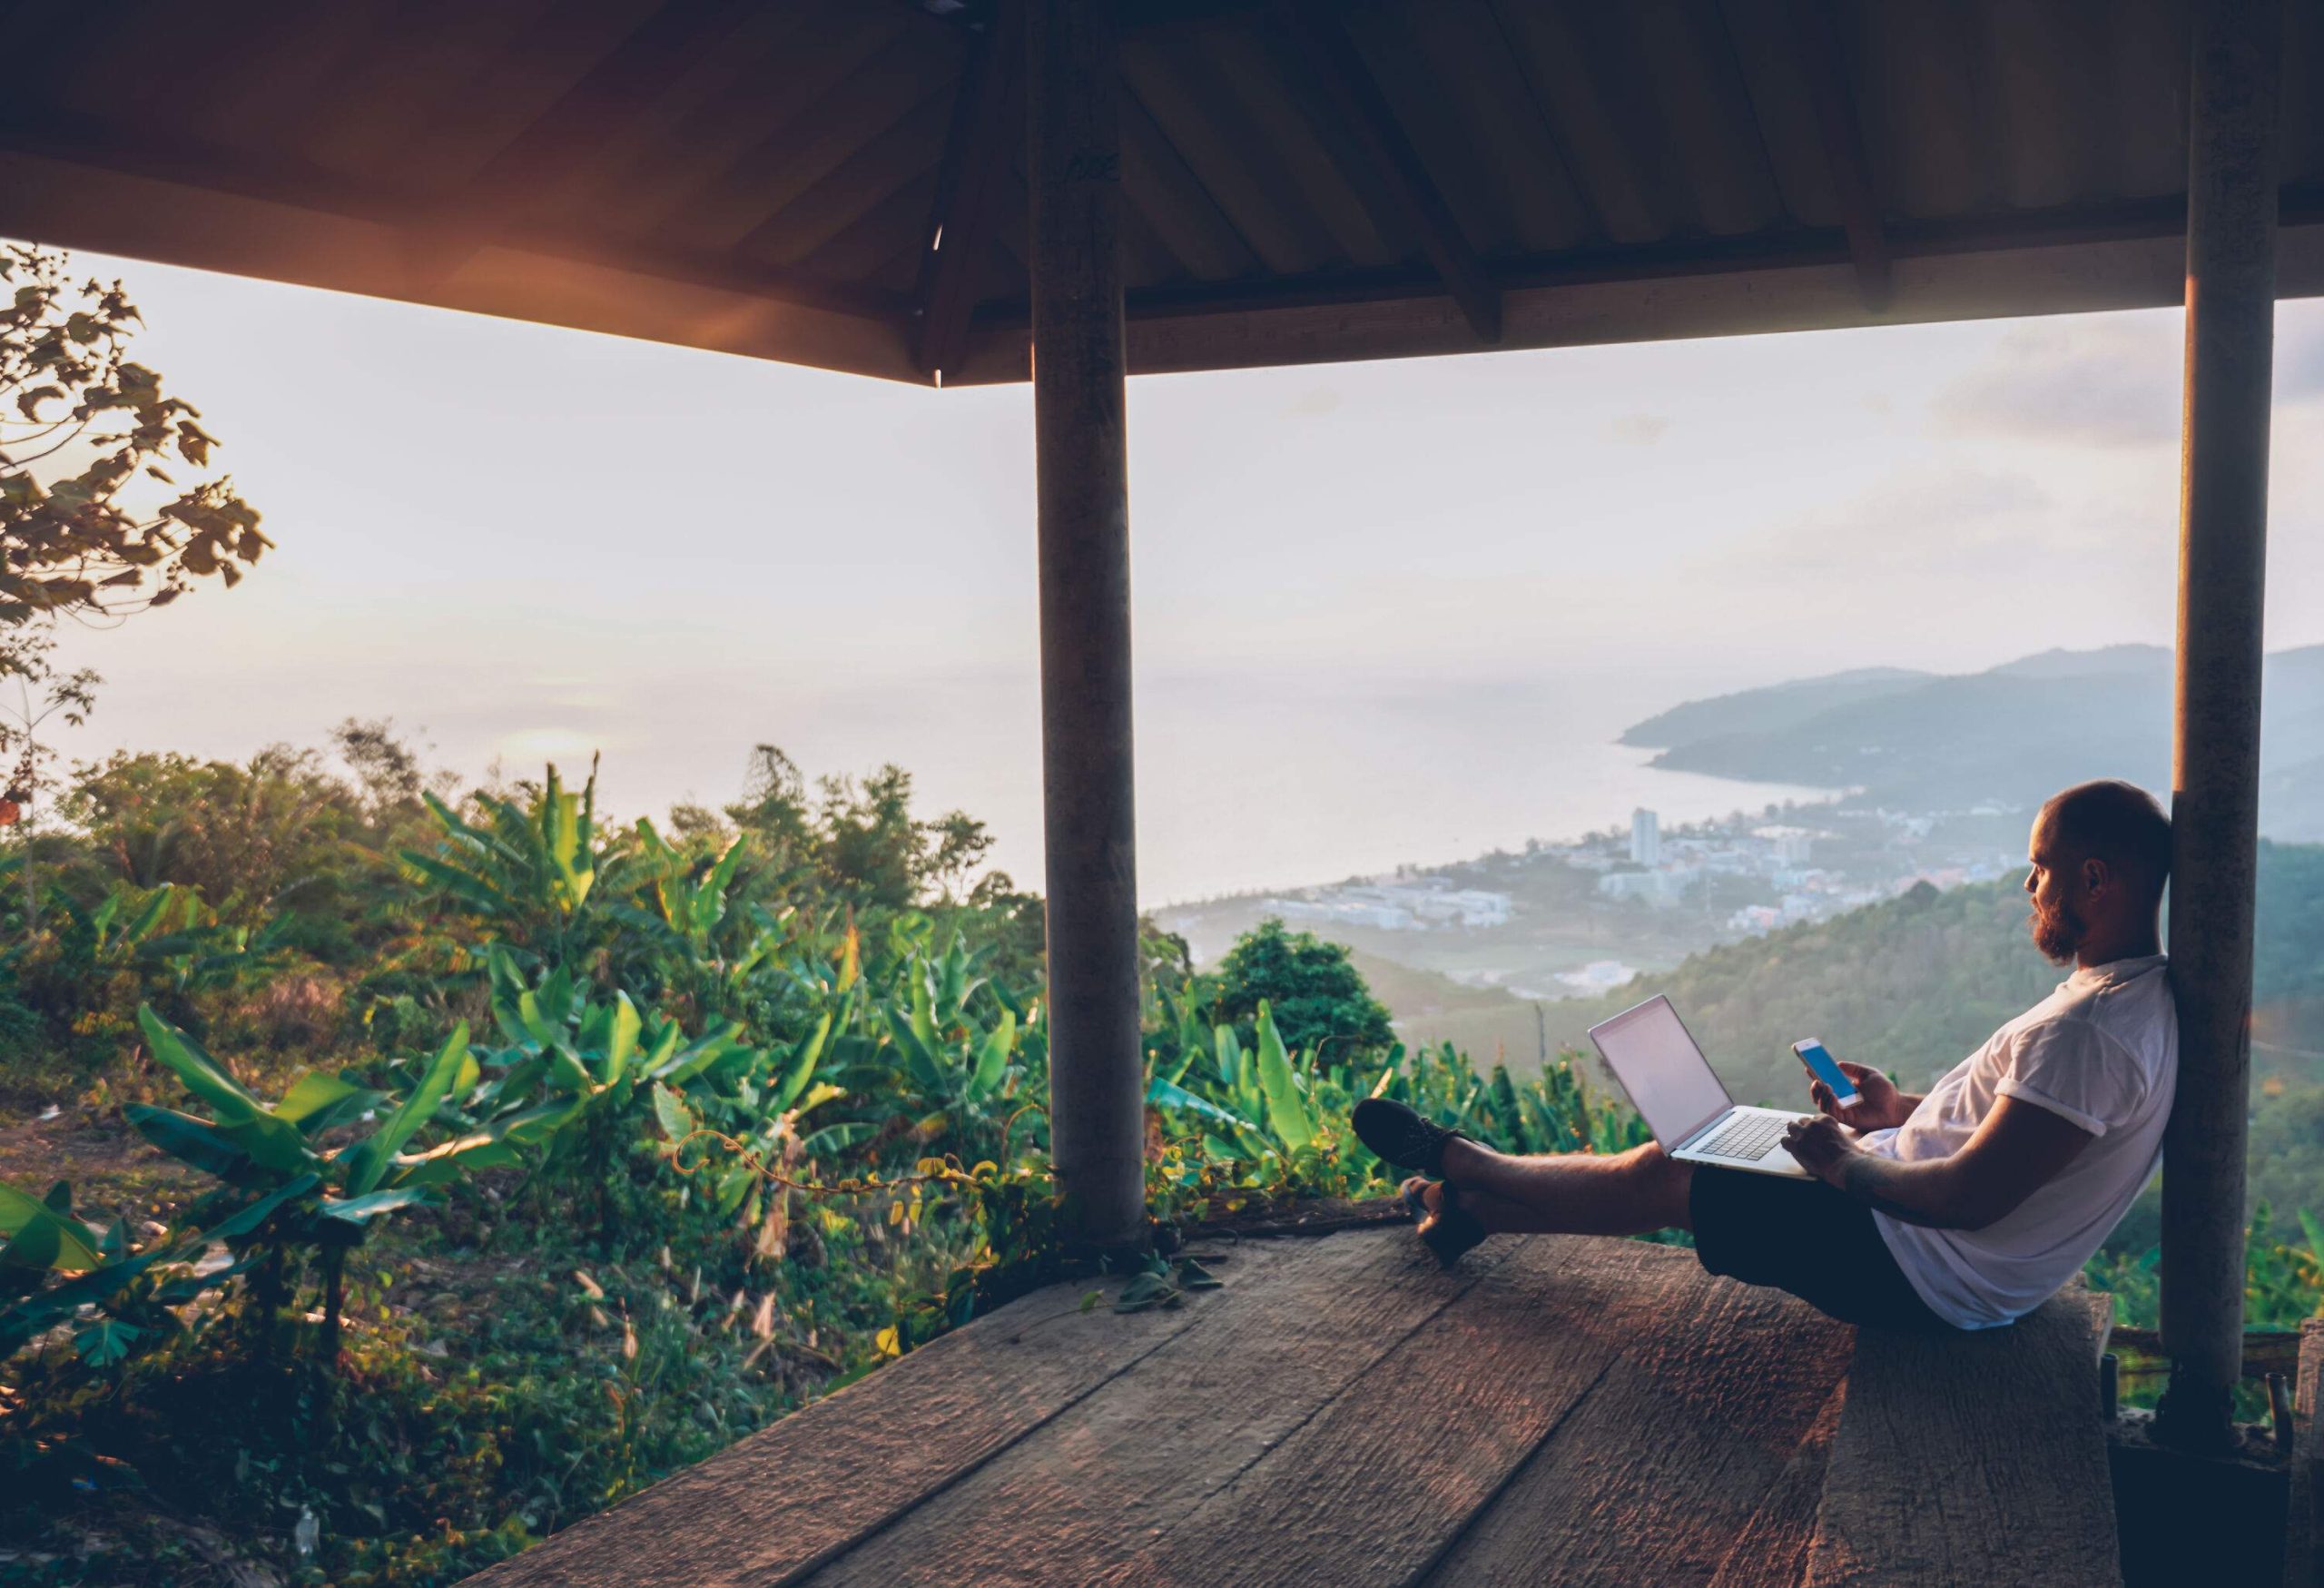 A male tourist sits on a wooden shed while working on his laptop and phone with a view of a village and the ocean downhill.